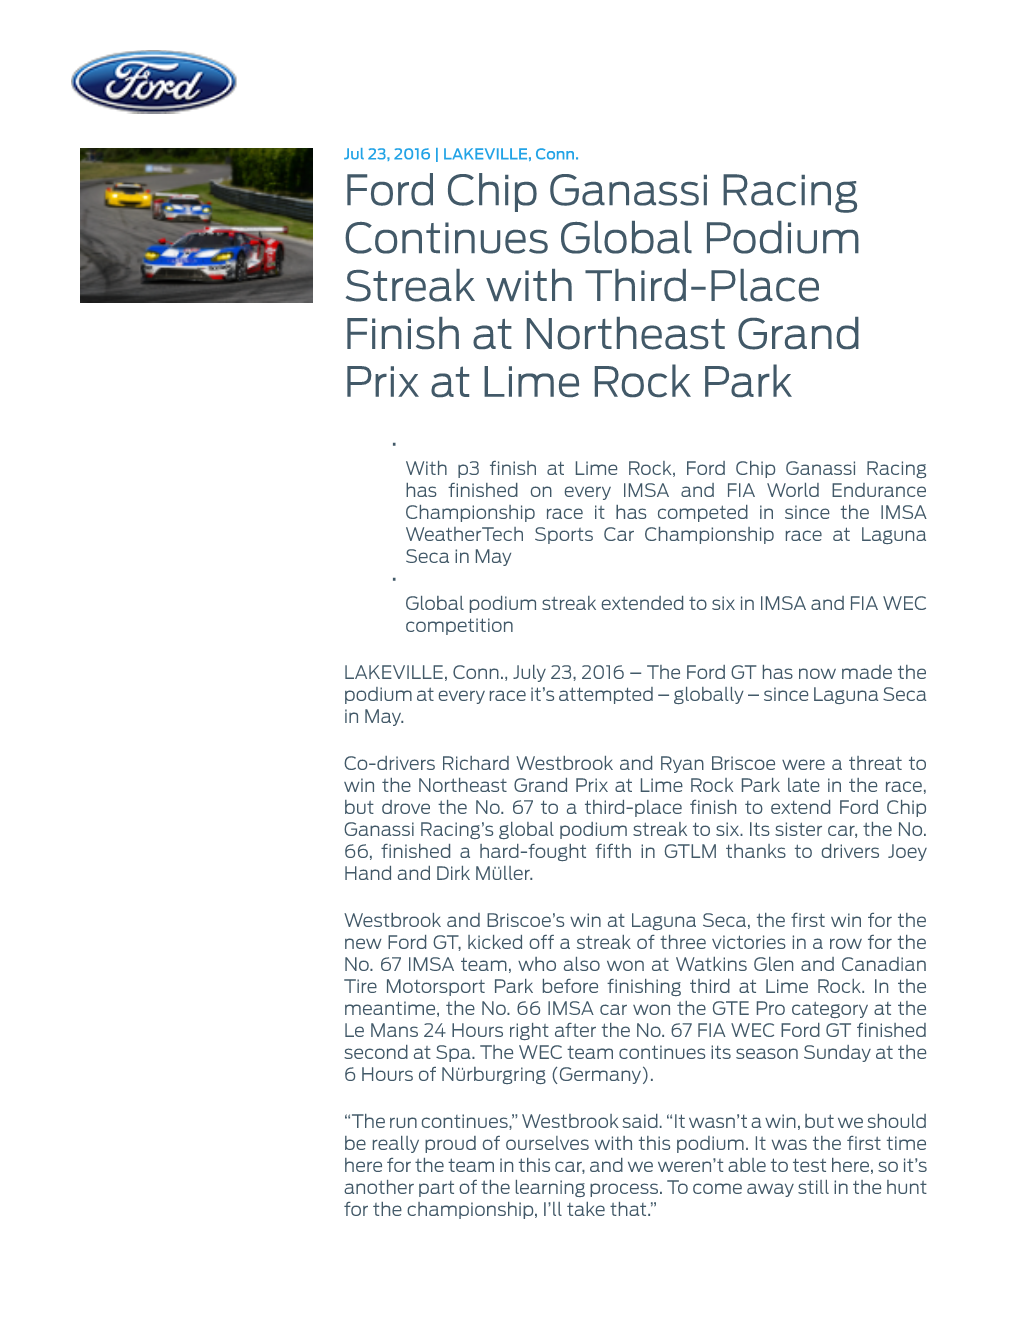 Ford Chip Ganassi Racing Continues Global Podium Streak with Third-Place Finish at Northeast Grand Prix at Lime Rock Park